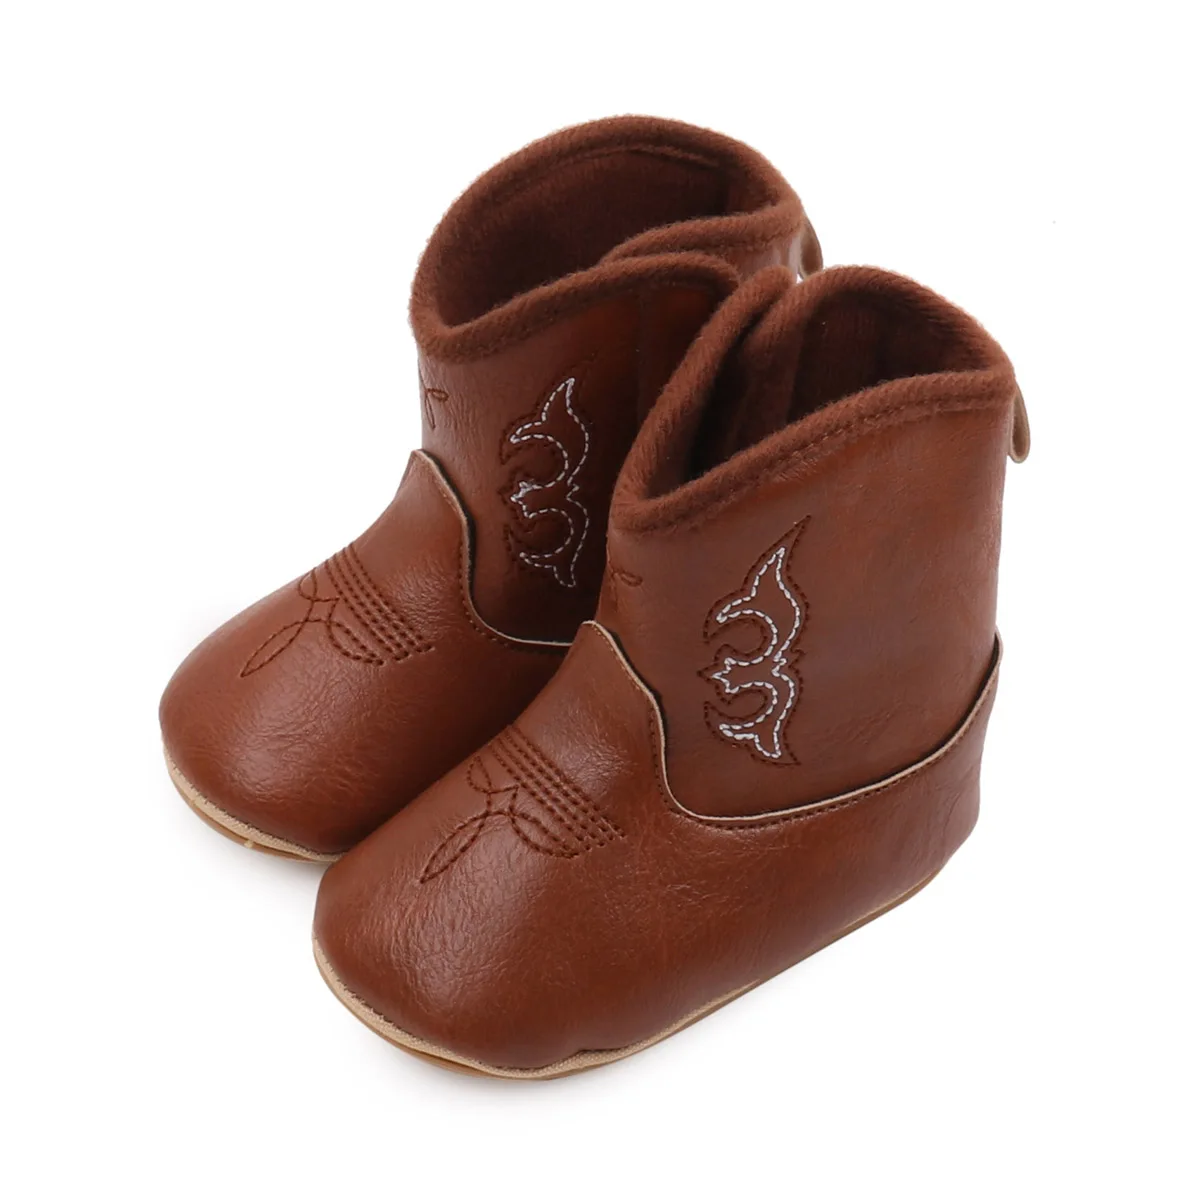 Boys Baby Girls Baby Winter Boots Soft Bottom Non-slip Baby Foreign-style Western Cowboy Leather Boots Baby Shoes